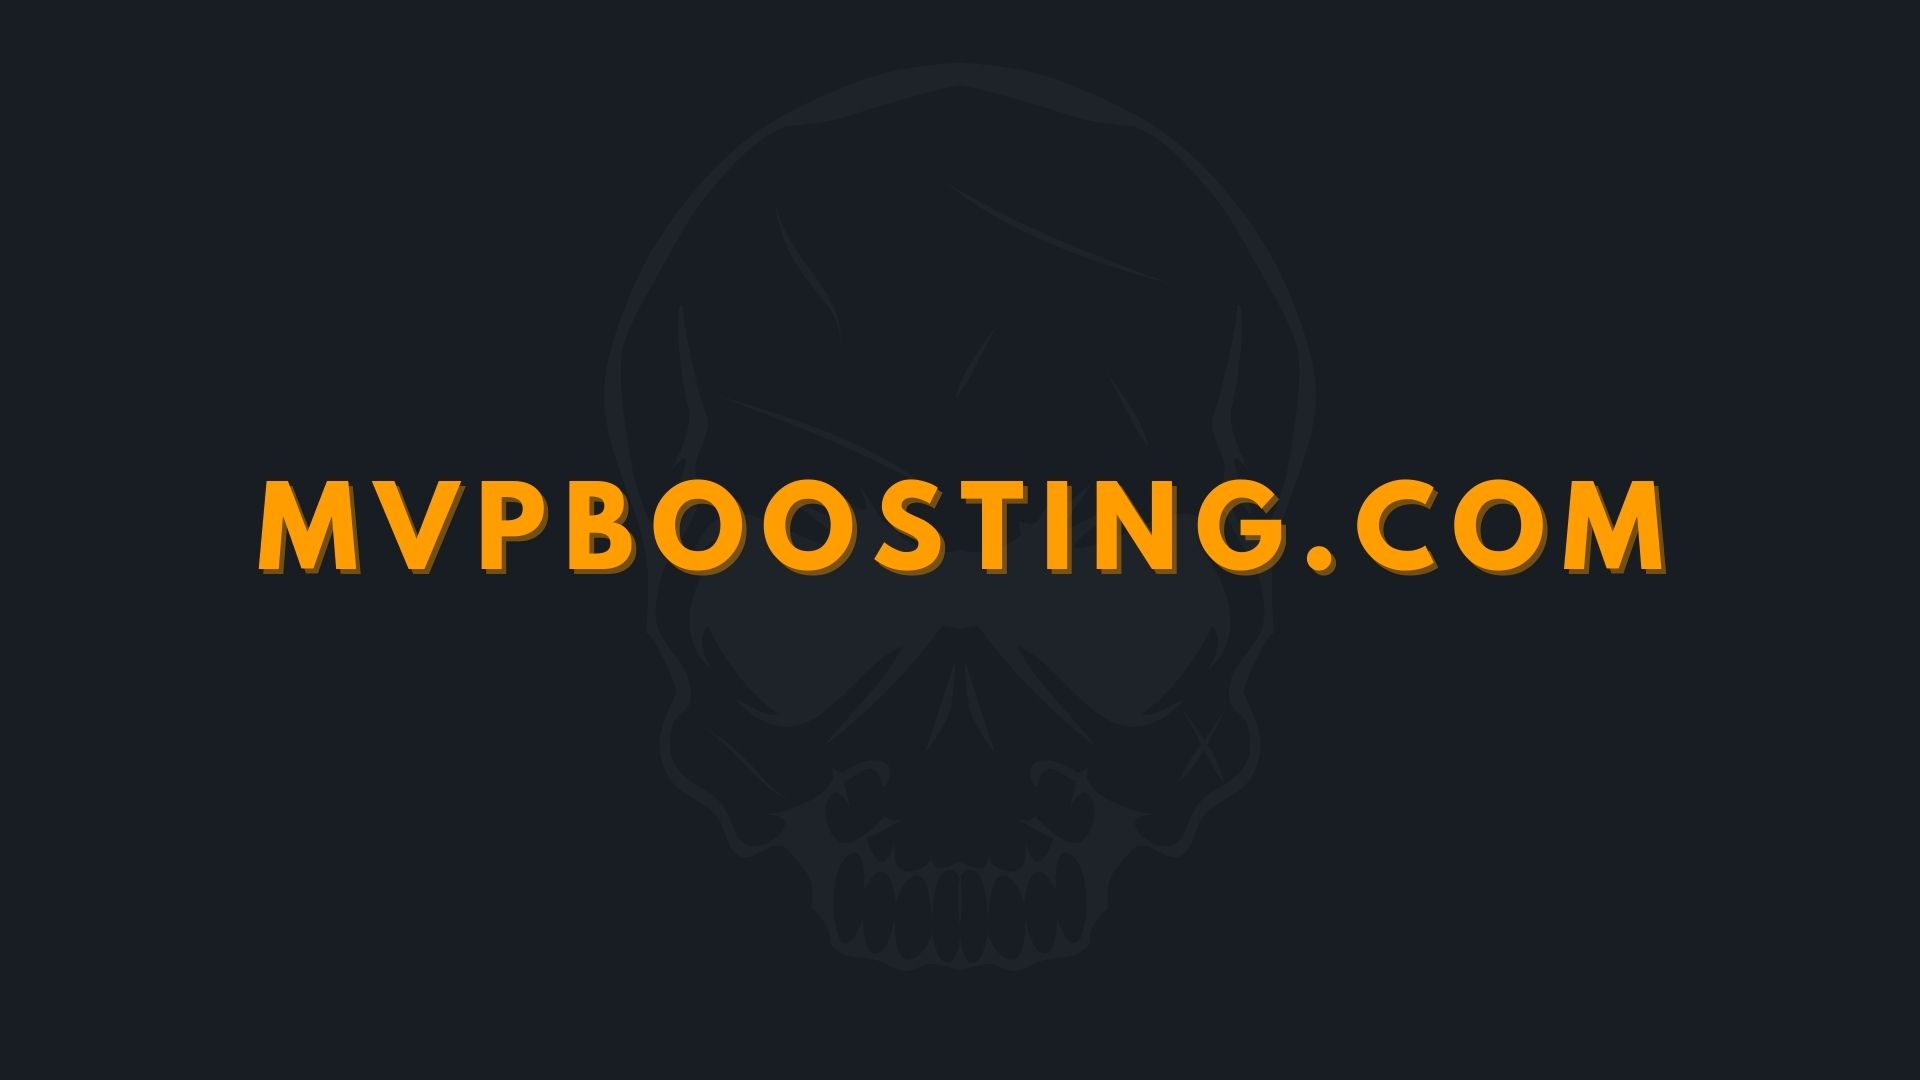 The best League of Legends eloboosting service! — Steemit